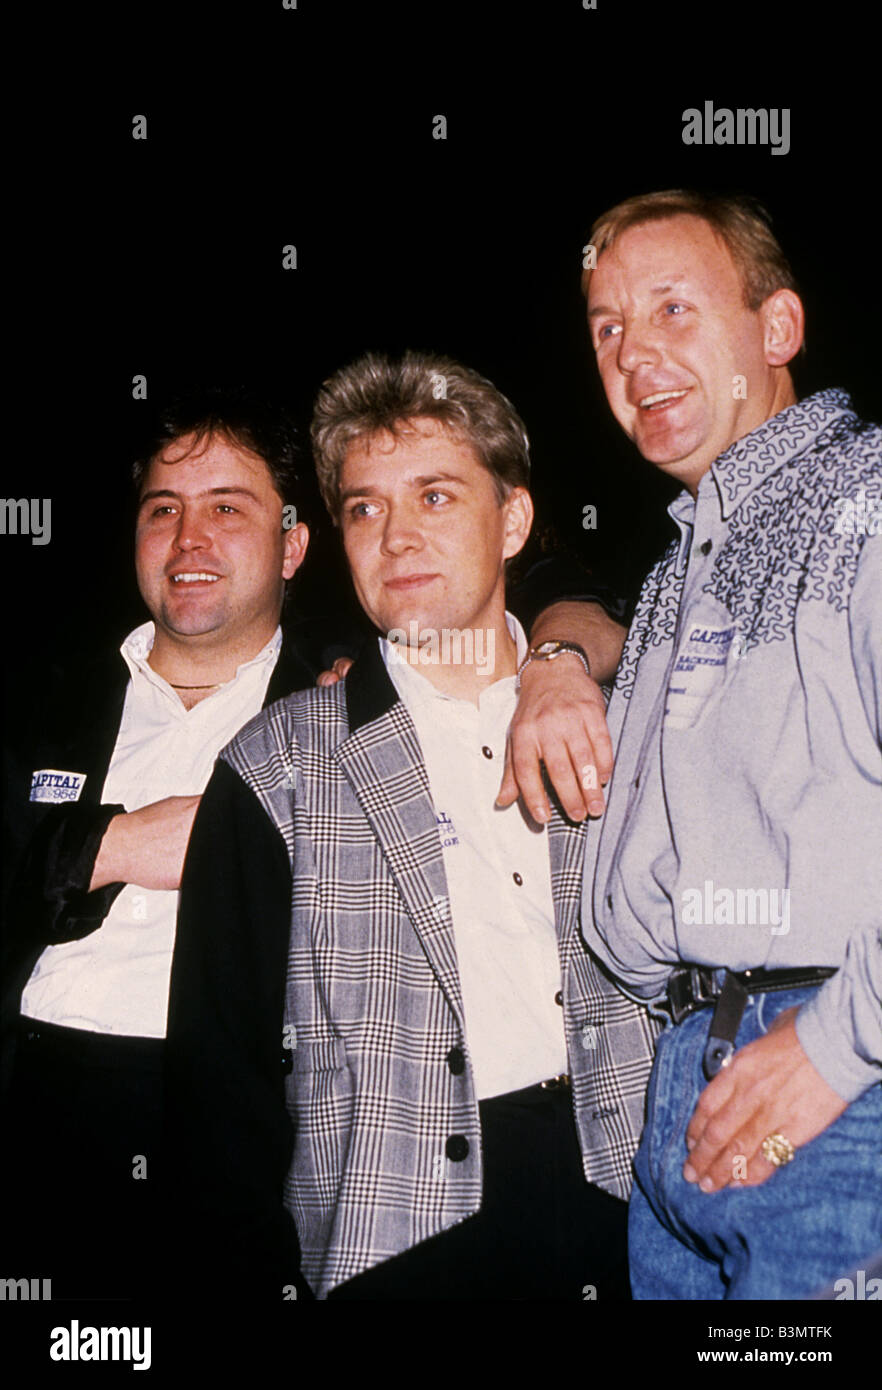 STOCK, AITKEN AND WATERMAN  UK pop music producers. From l: Mike Stock, Matthew Aitken and Pete Waterman about 1989 Stock Photo